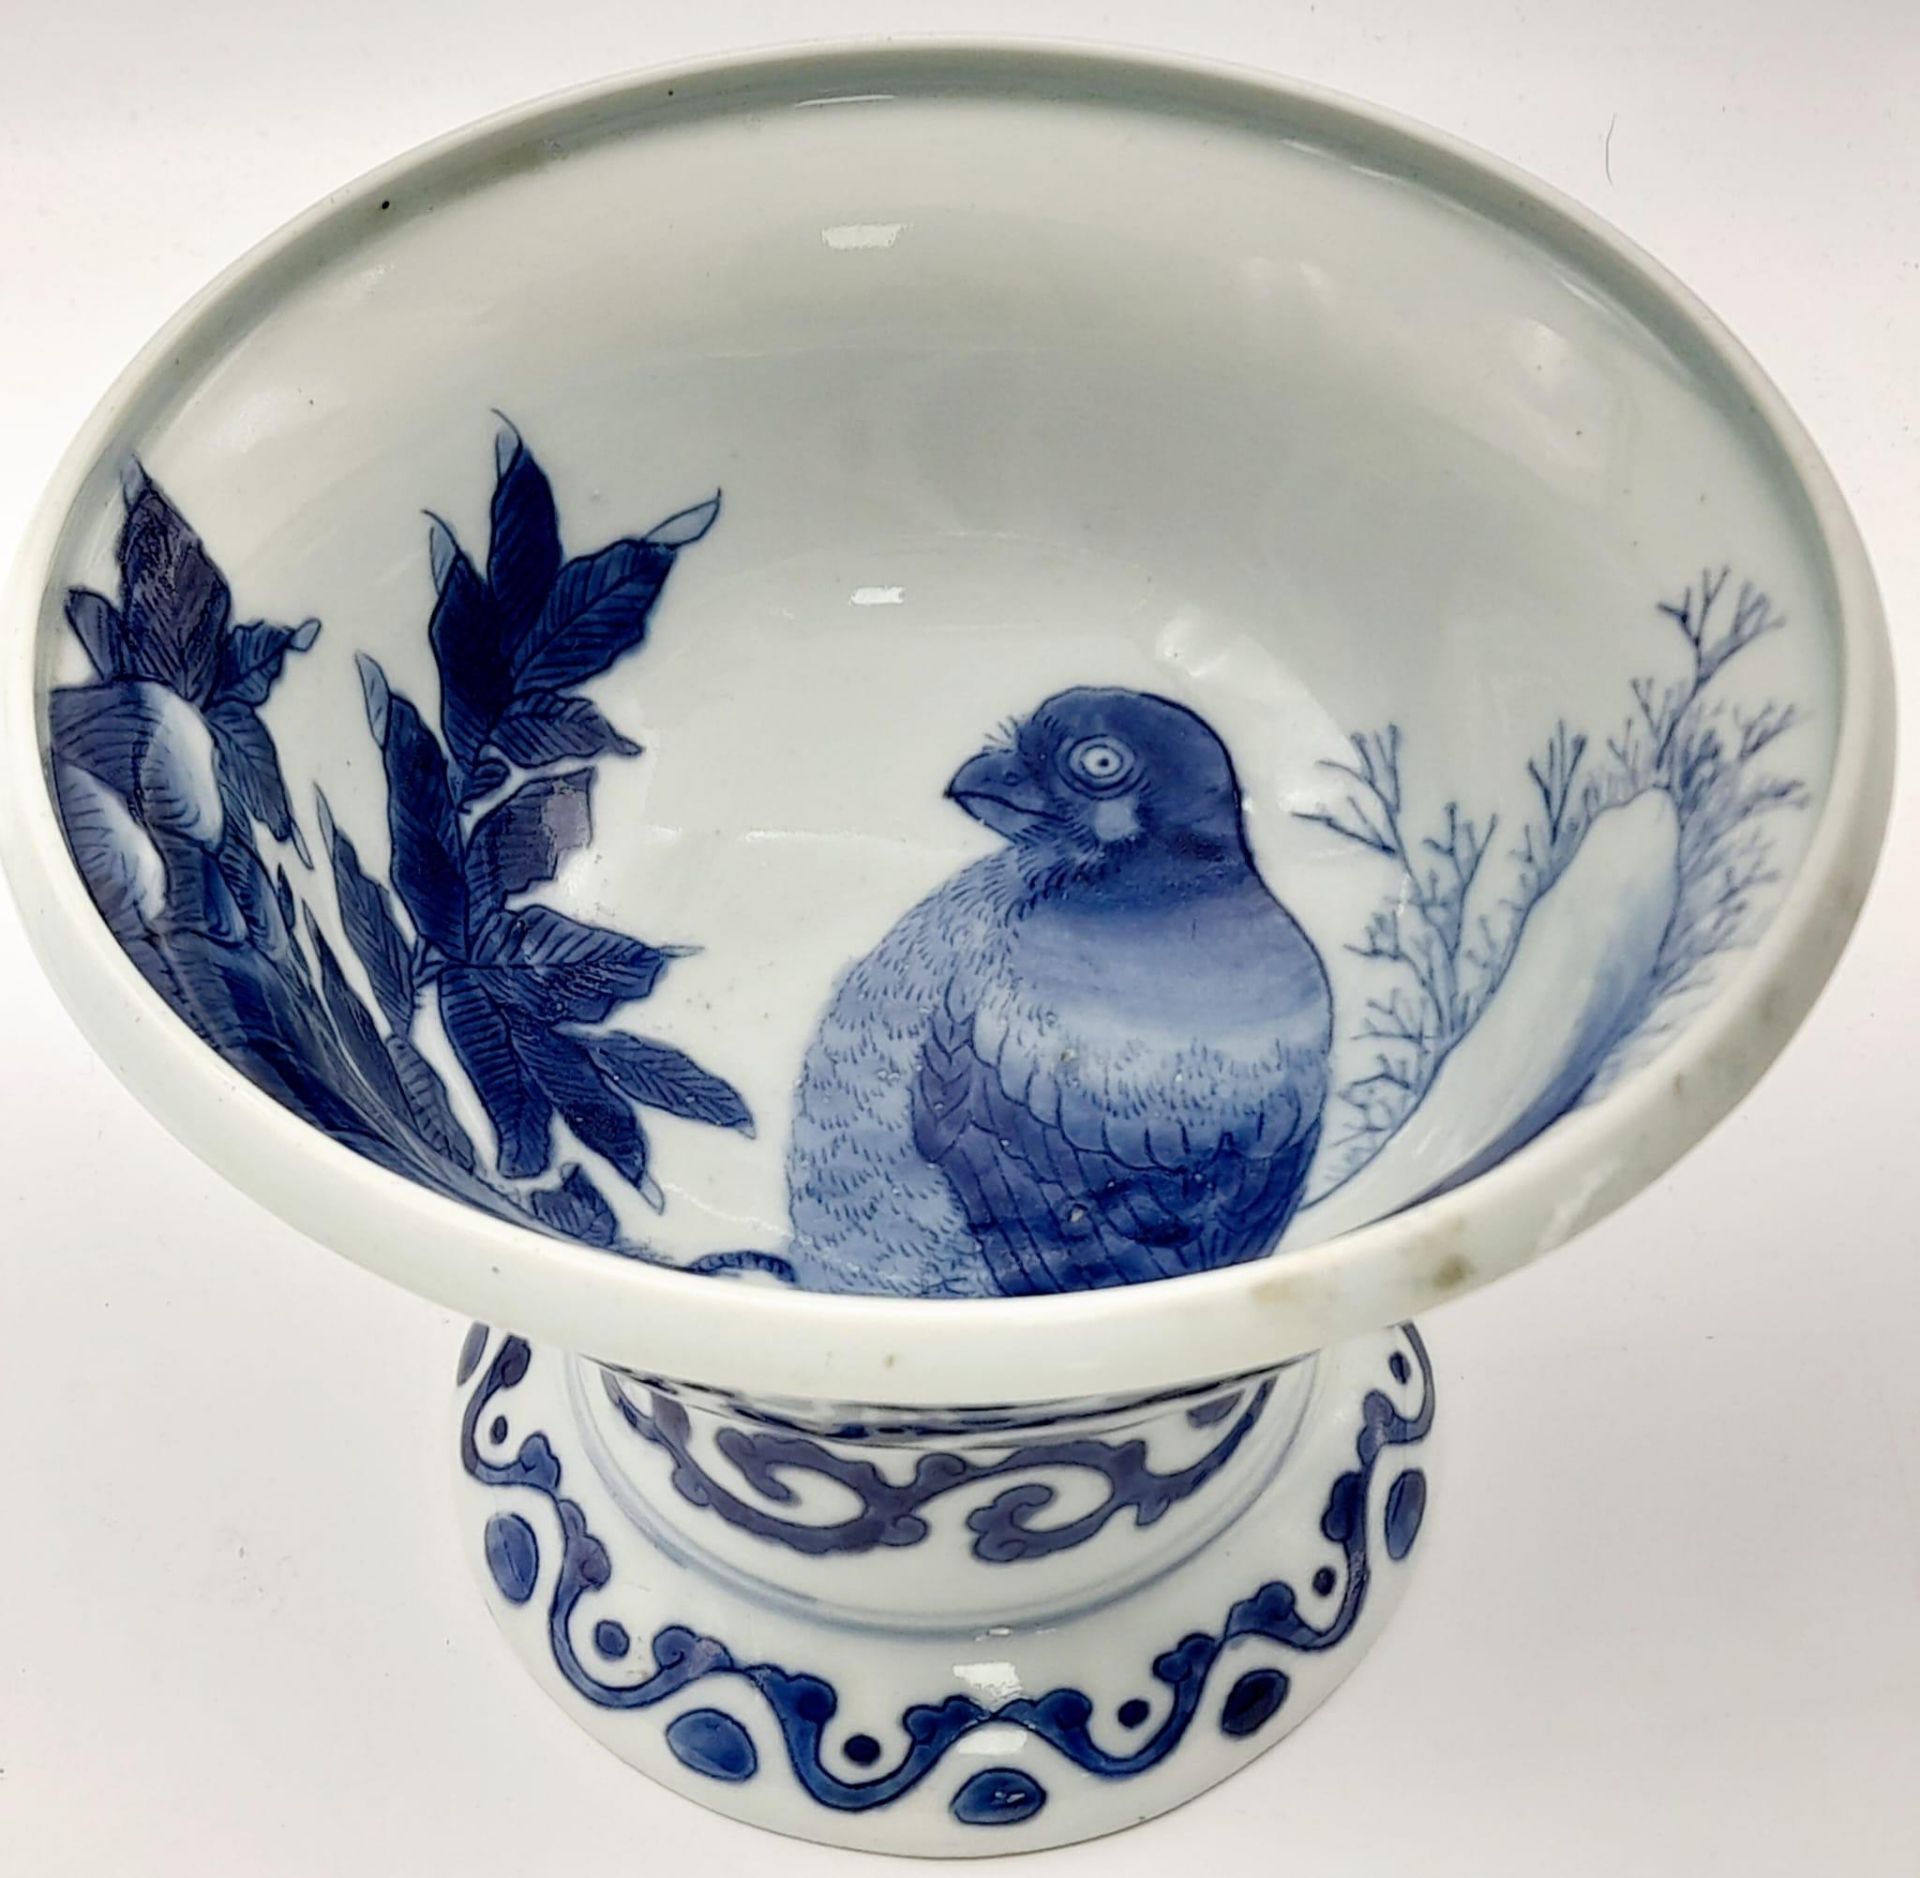 An Antique (Mid 19th century) Blue and White Large Tazza. Wonderful decoration depicting a large